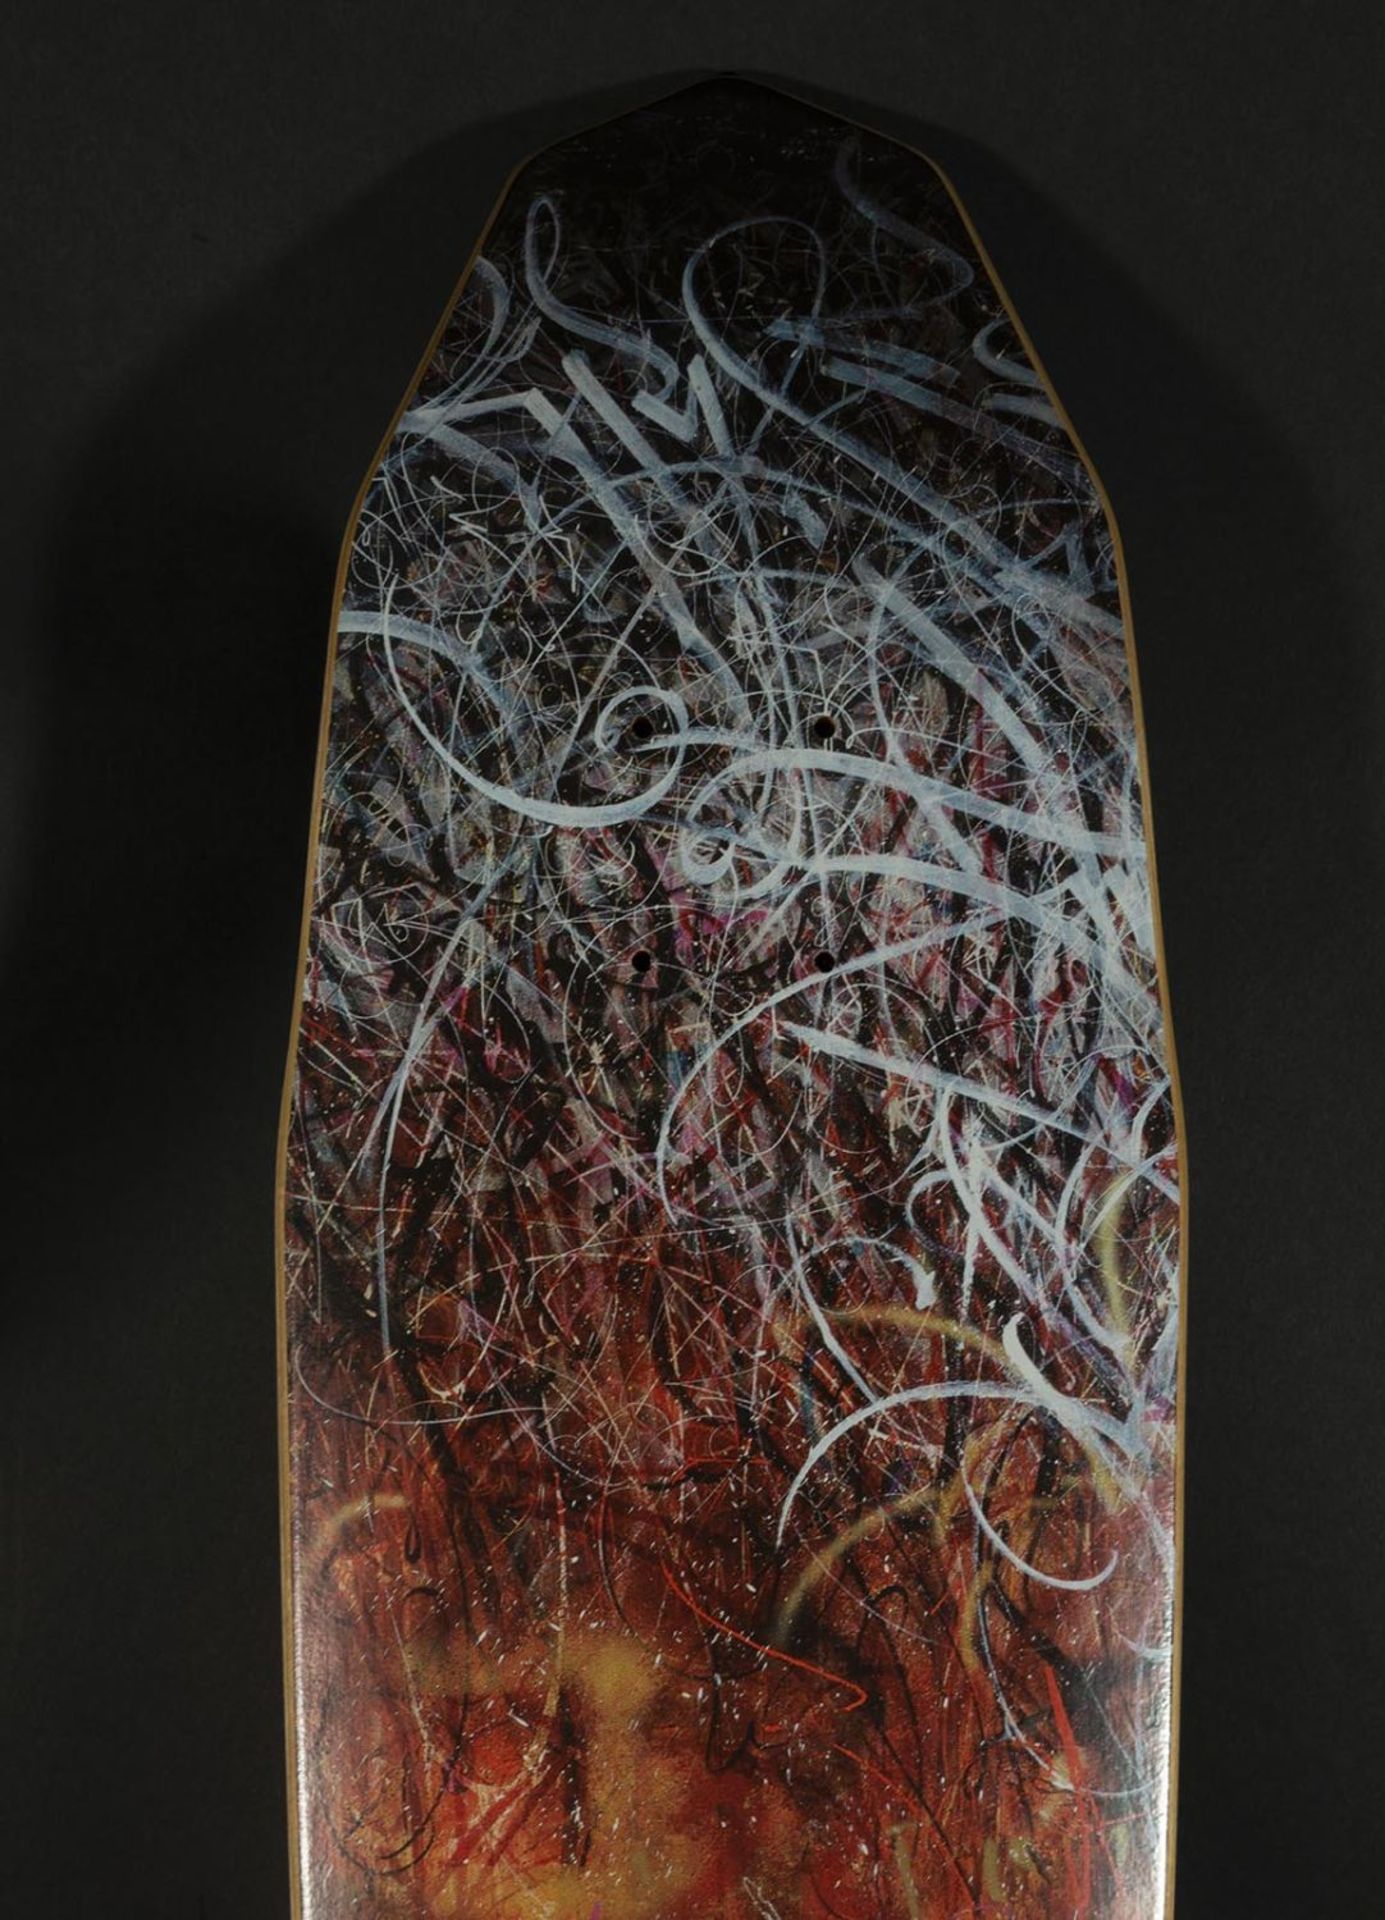 Skate, José Parla (born in Miami, Florida, 1973), limited edition of 200 units - Image 2 of 9